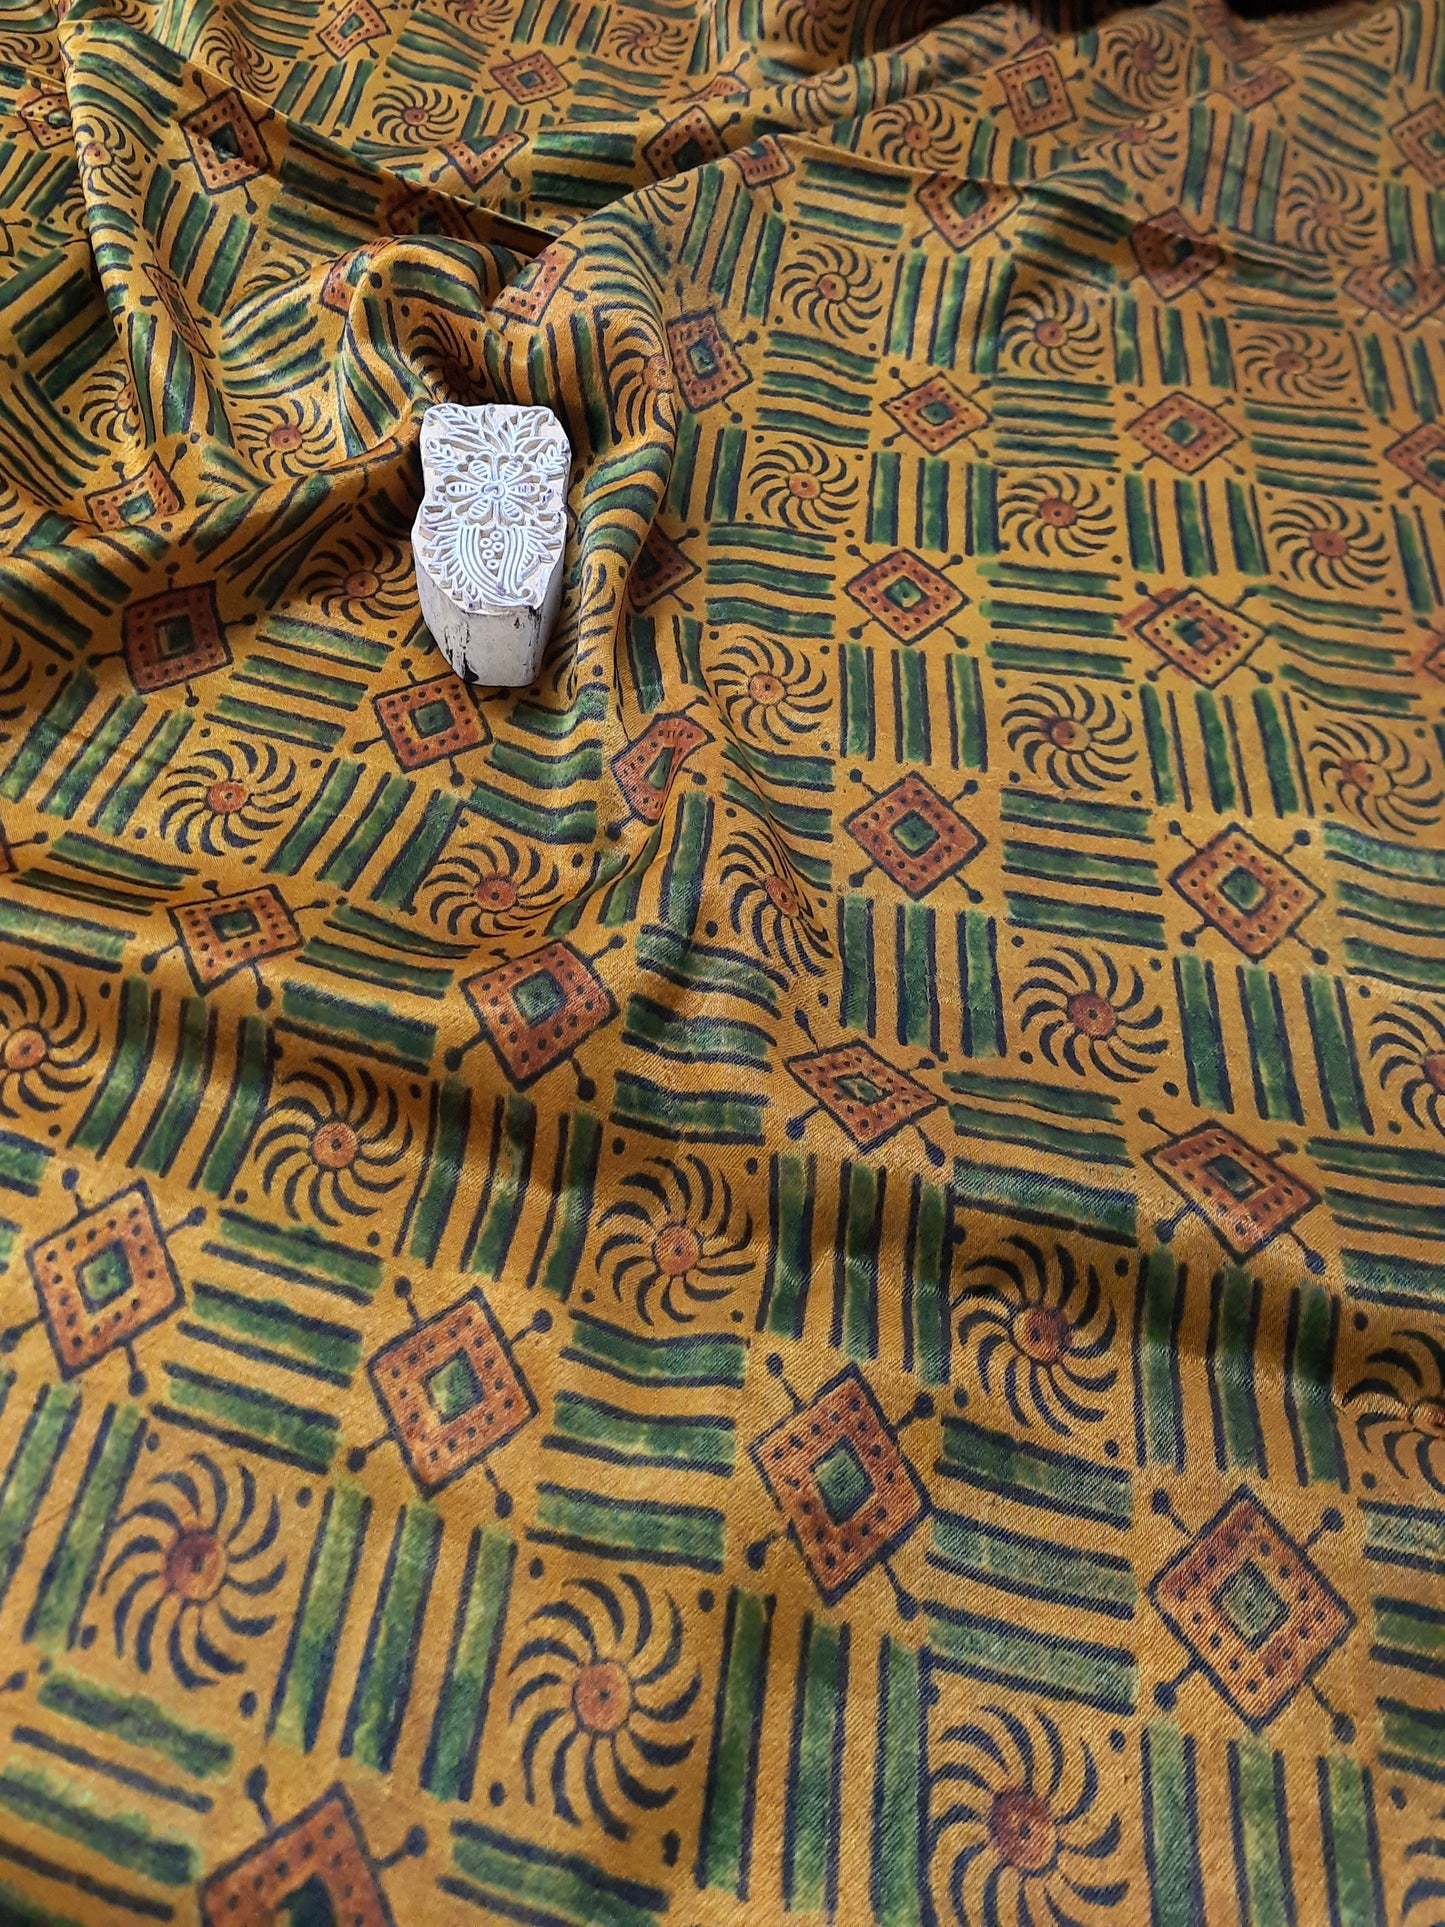 Indulge in the luxurious feel of Mashru silk fabric, hand block printed with the intricate ajrakh design. The unique turmeric dye makes this fabric even more special, while supporting eco-friendly fashion. Elevate your wardrobe with this artisan-crafted  fabric.